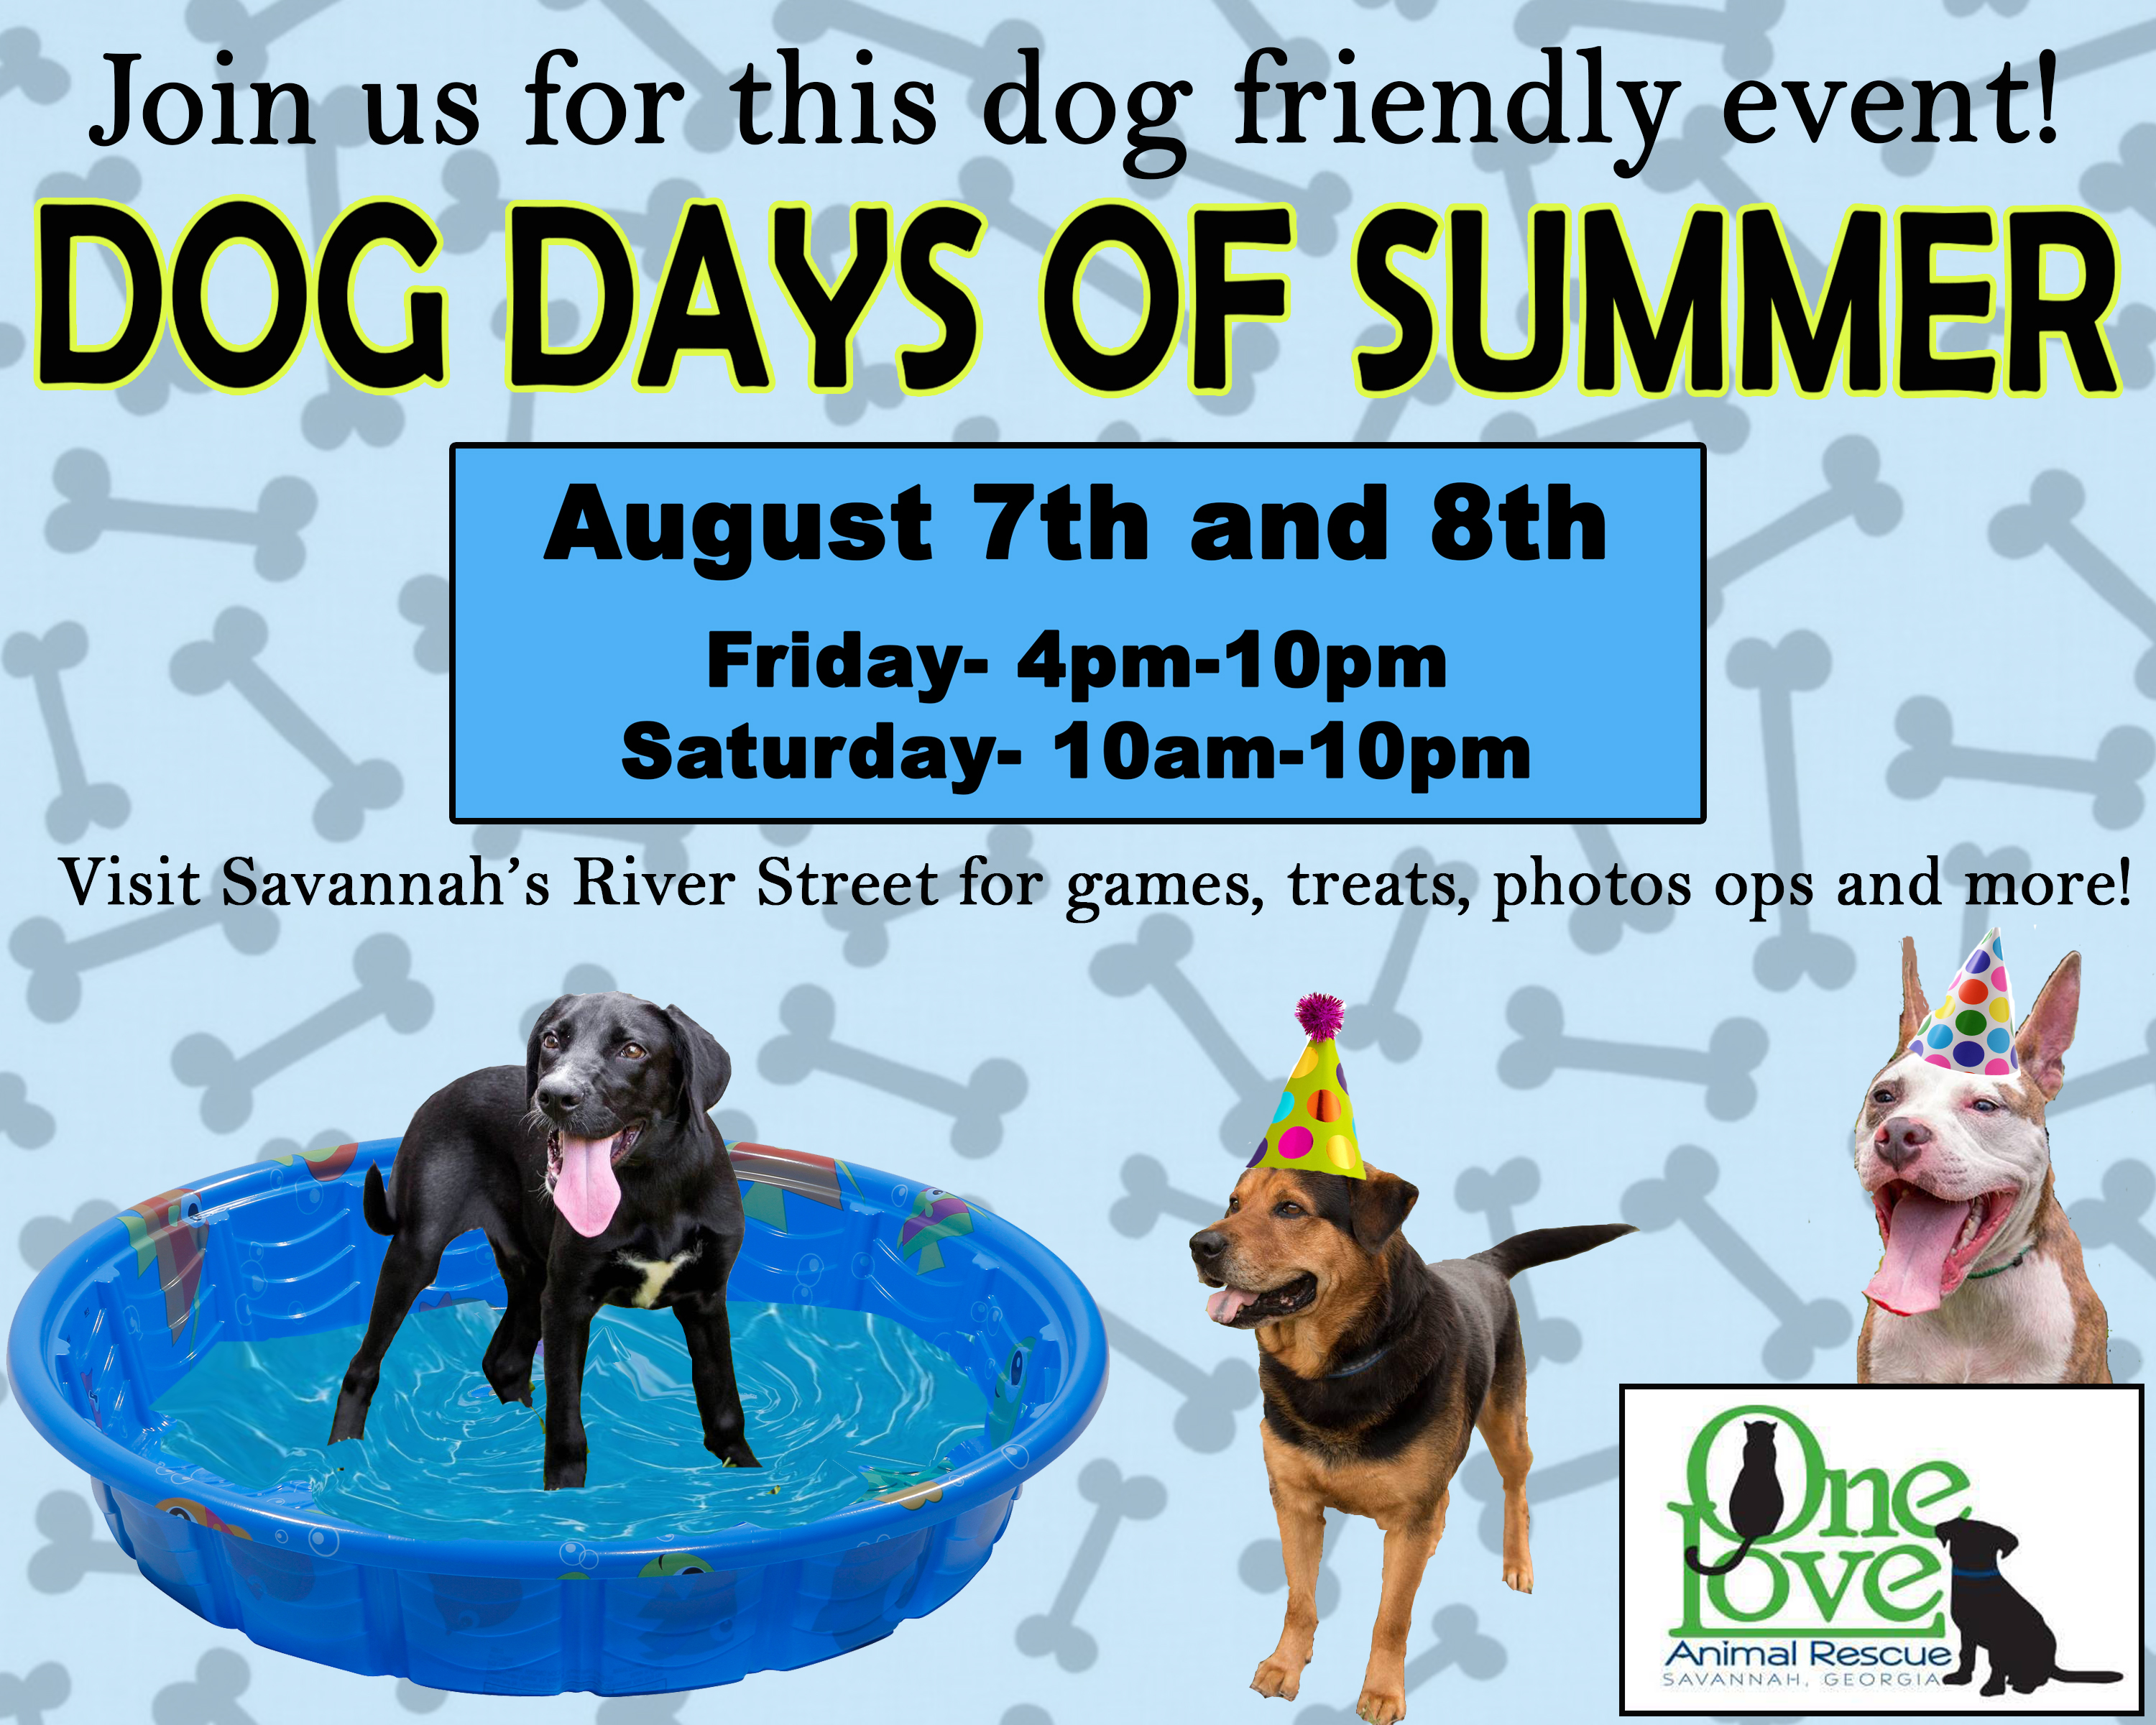 Dog Days of Summer EventBring your Humans! One Love Animal Rescue